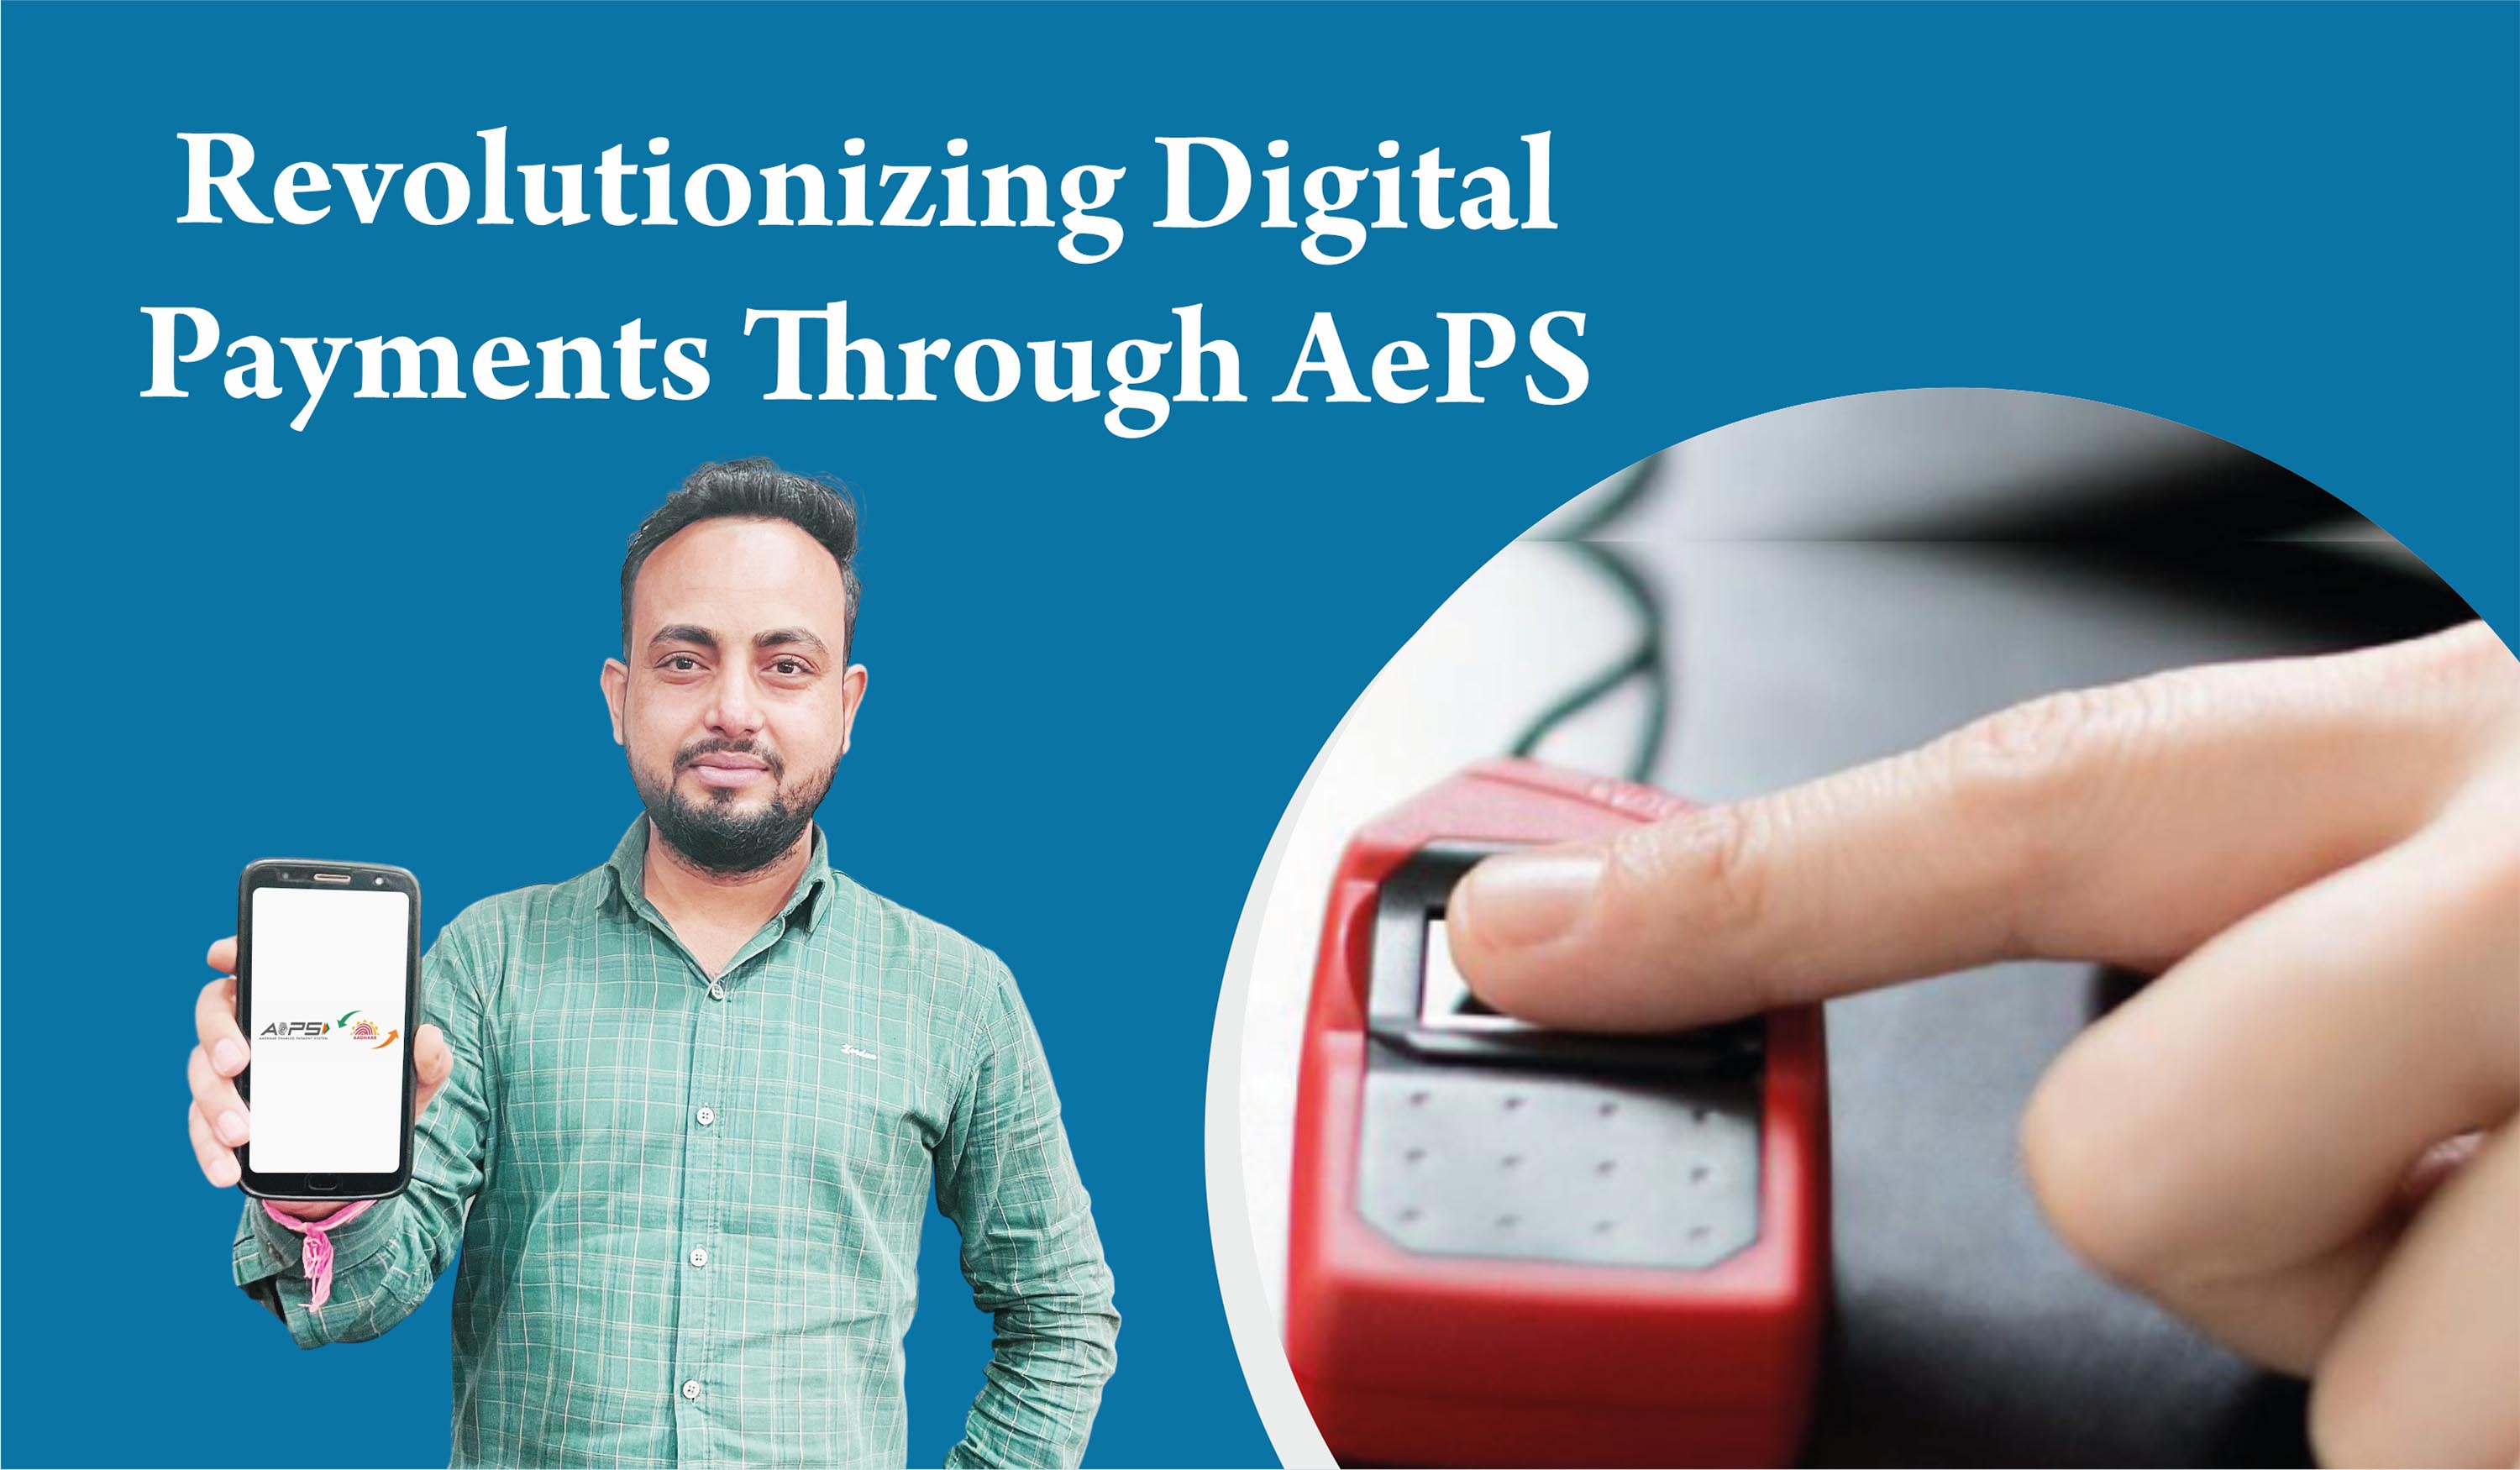 Revolution of digital payments through AePS